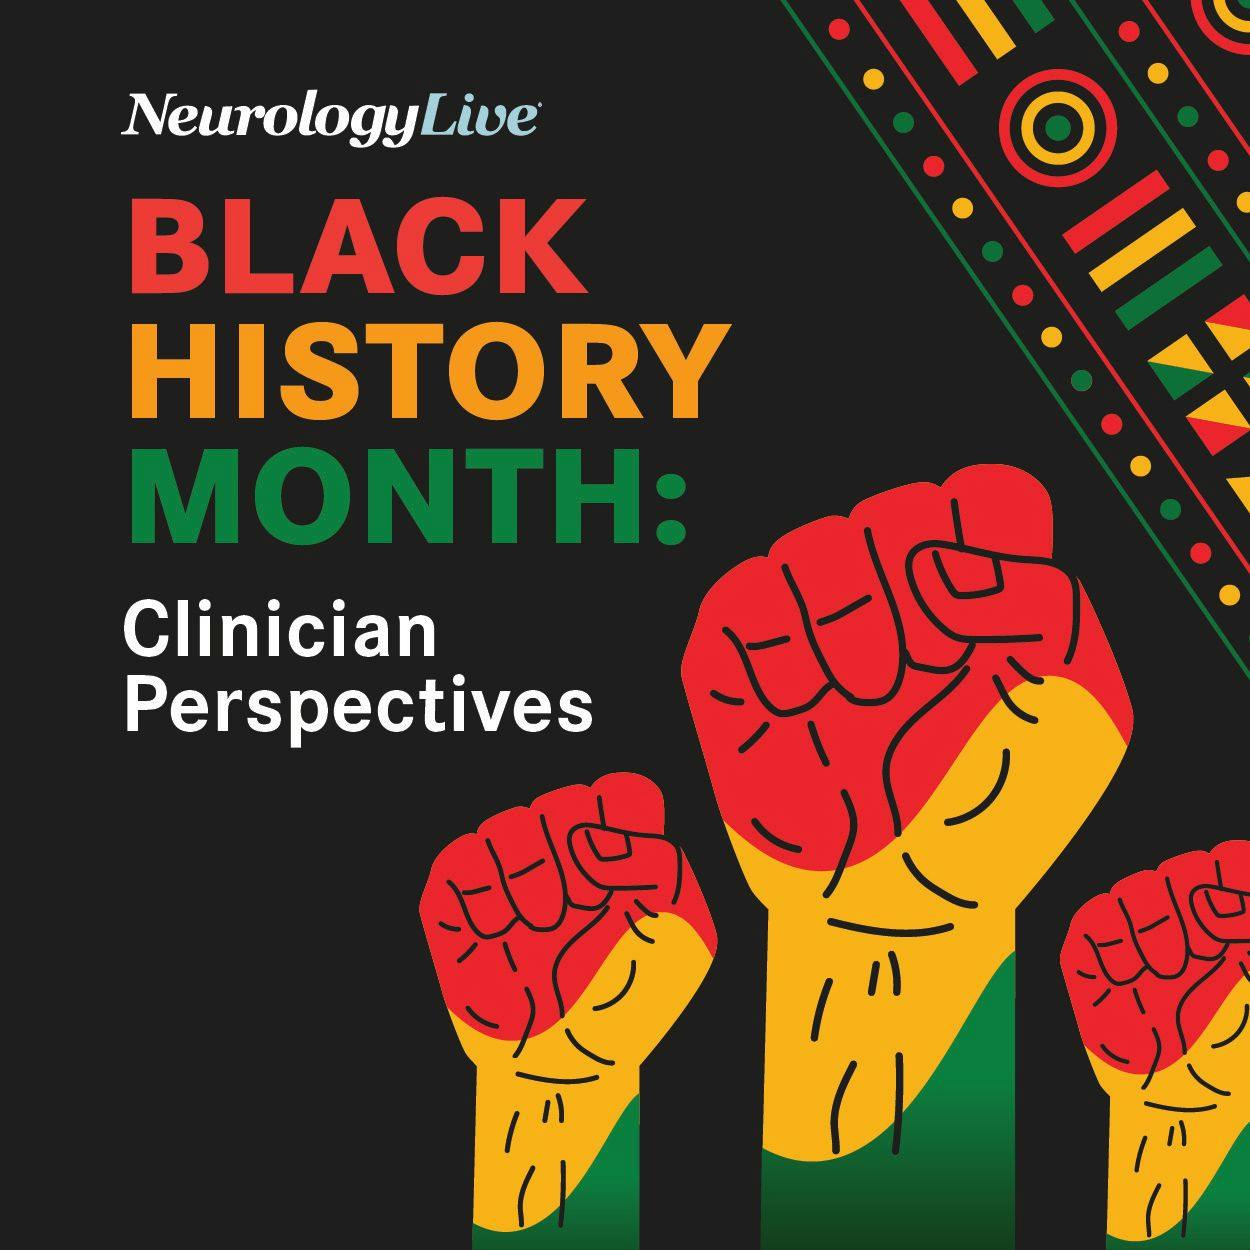 Clinician Perspectives on Black History Month: Jennifer Adrissi, MD